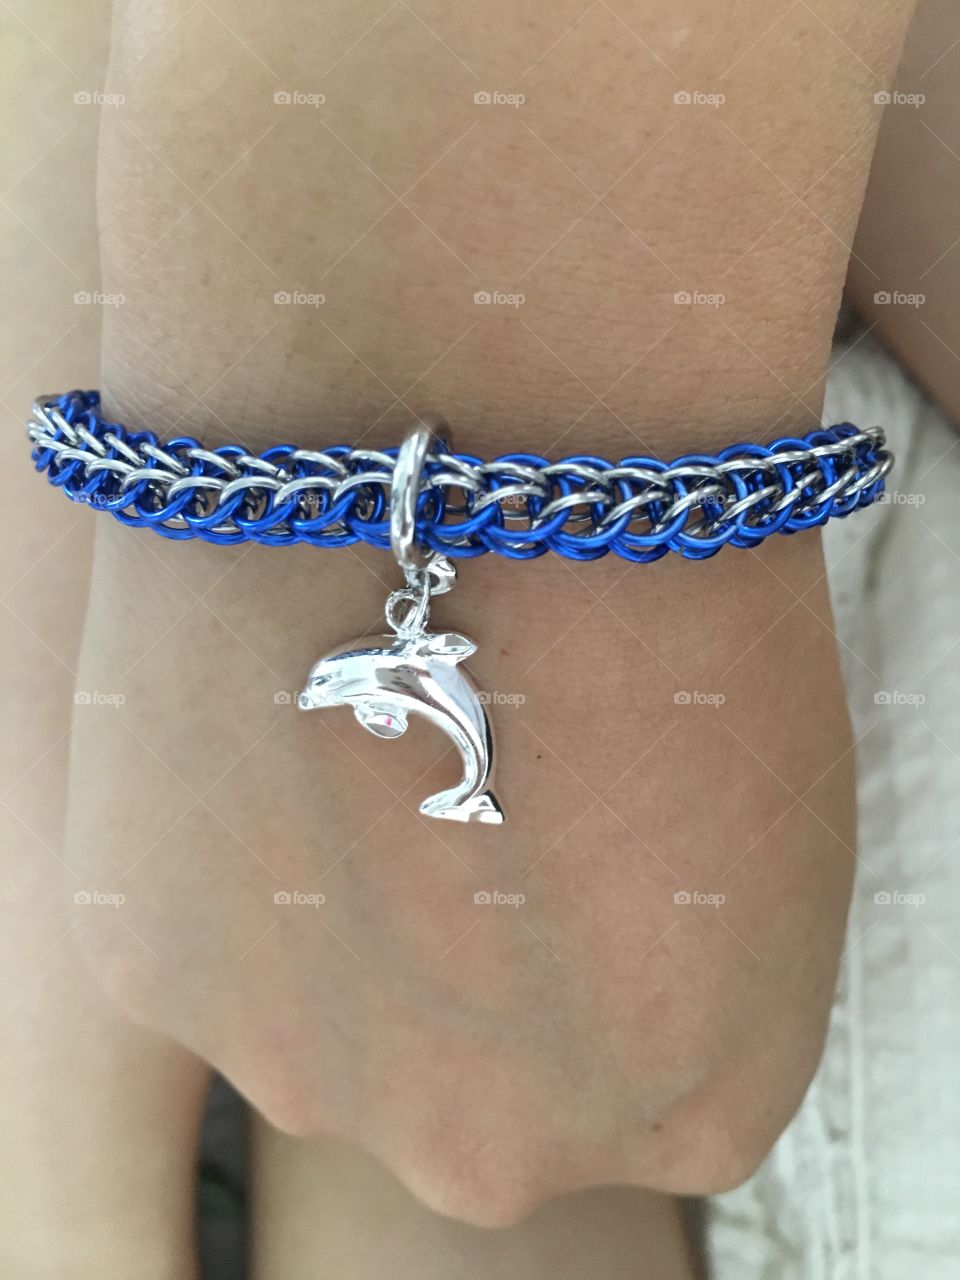 Homemade bracelet!! With dolphin... 